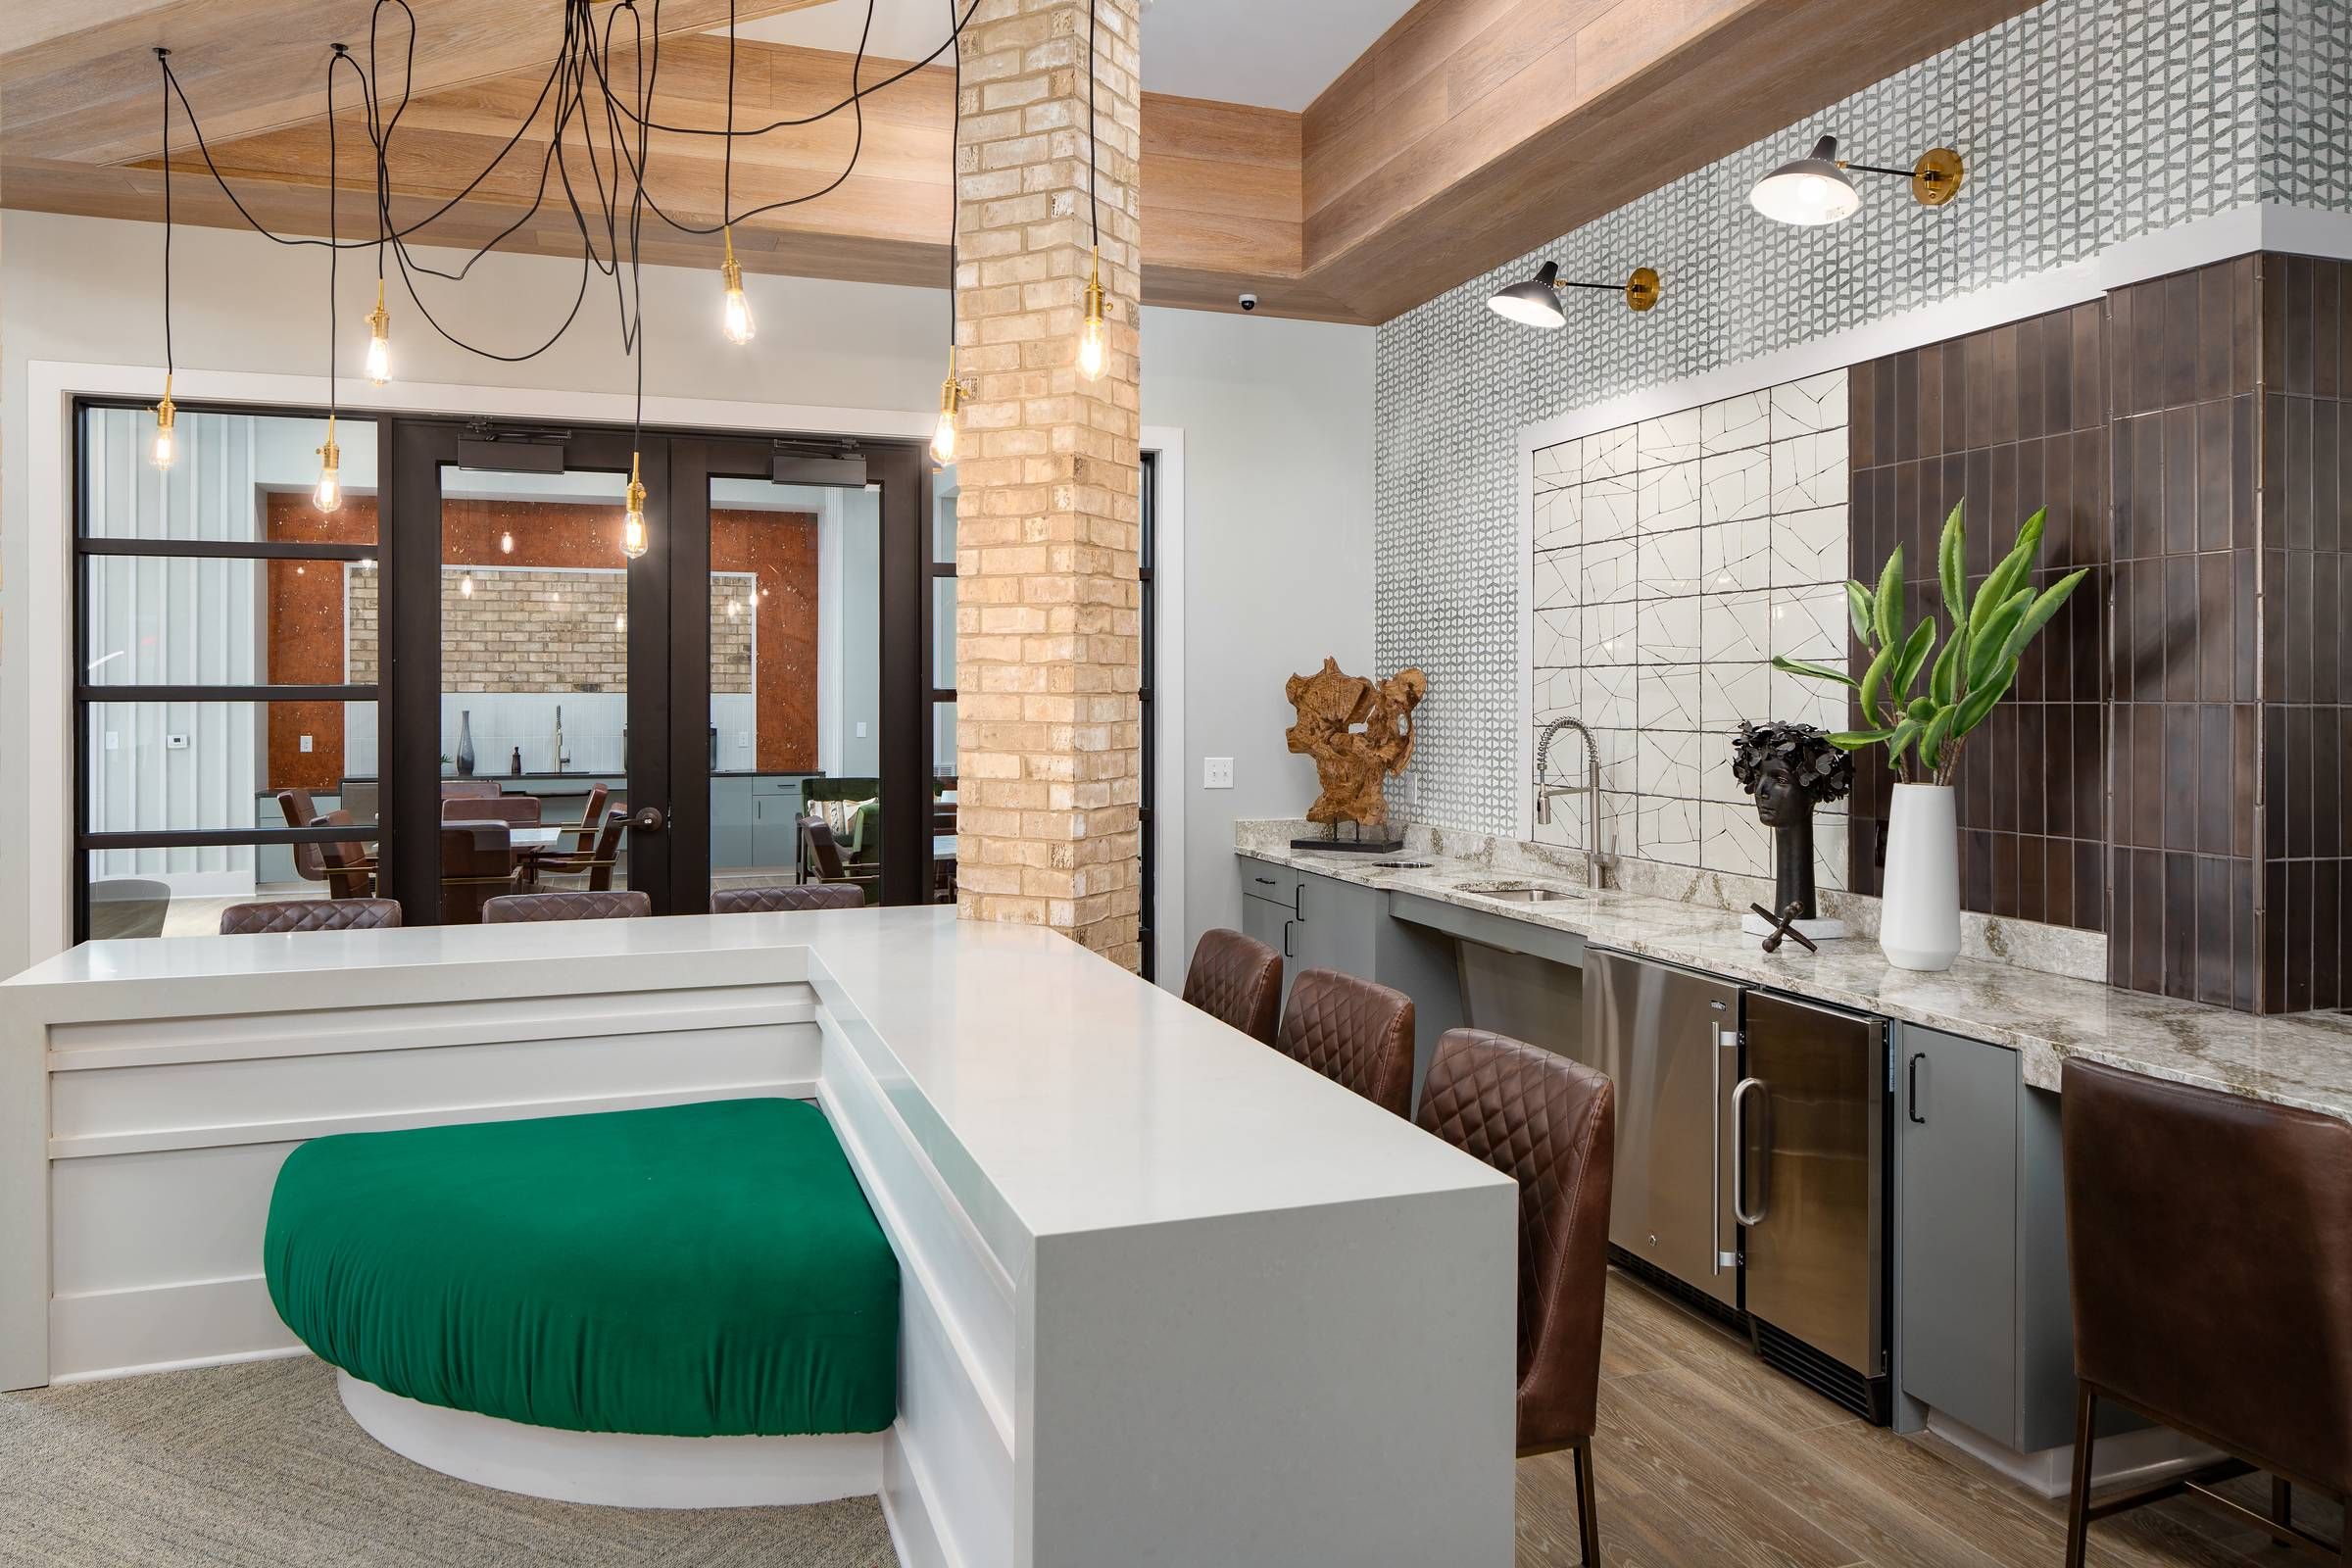 Alta Sugarloaf's modern kitchen and dining area with a white island countertop, leather bar stools, and elegant light fixtures, complemented by tasteful artwork and plants.